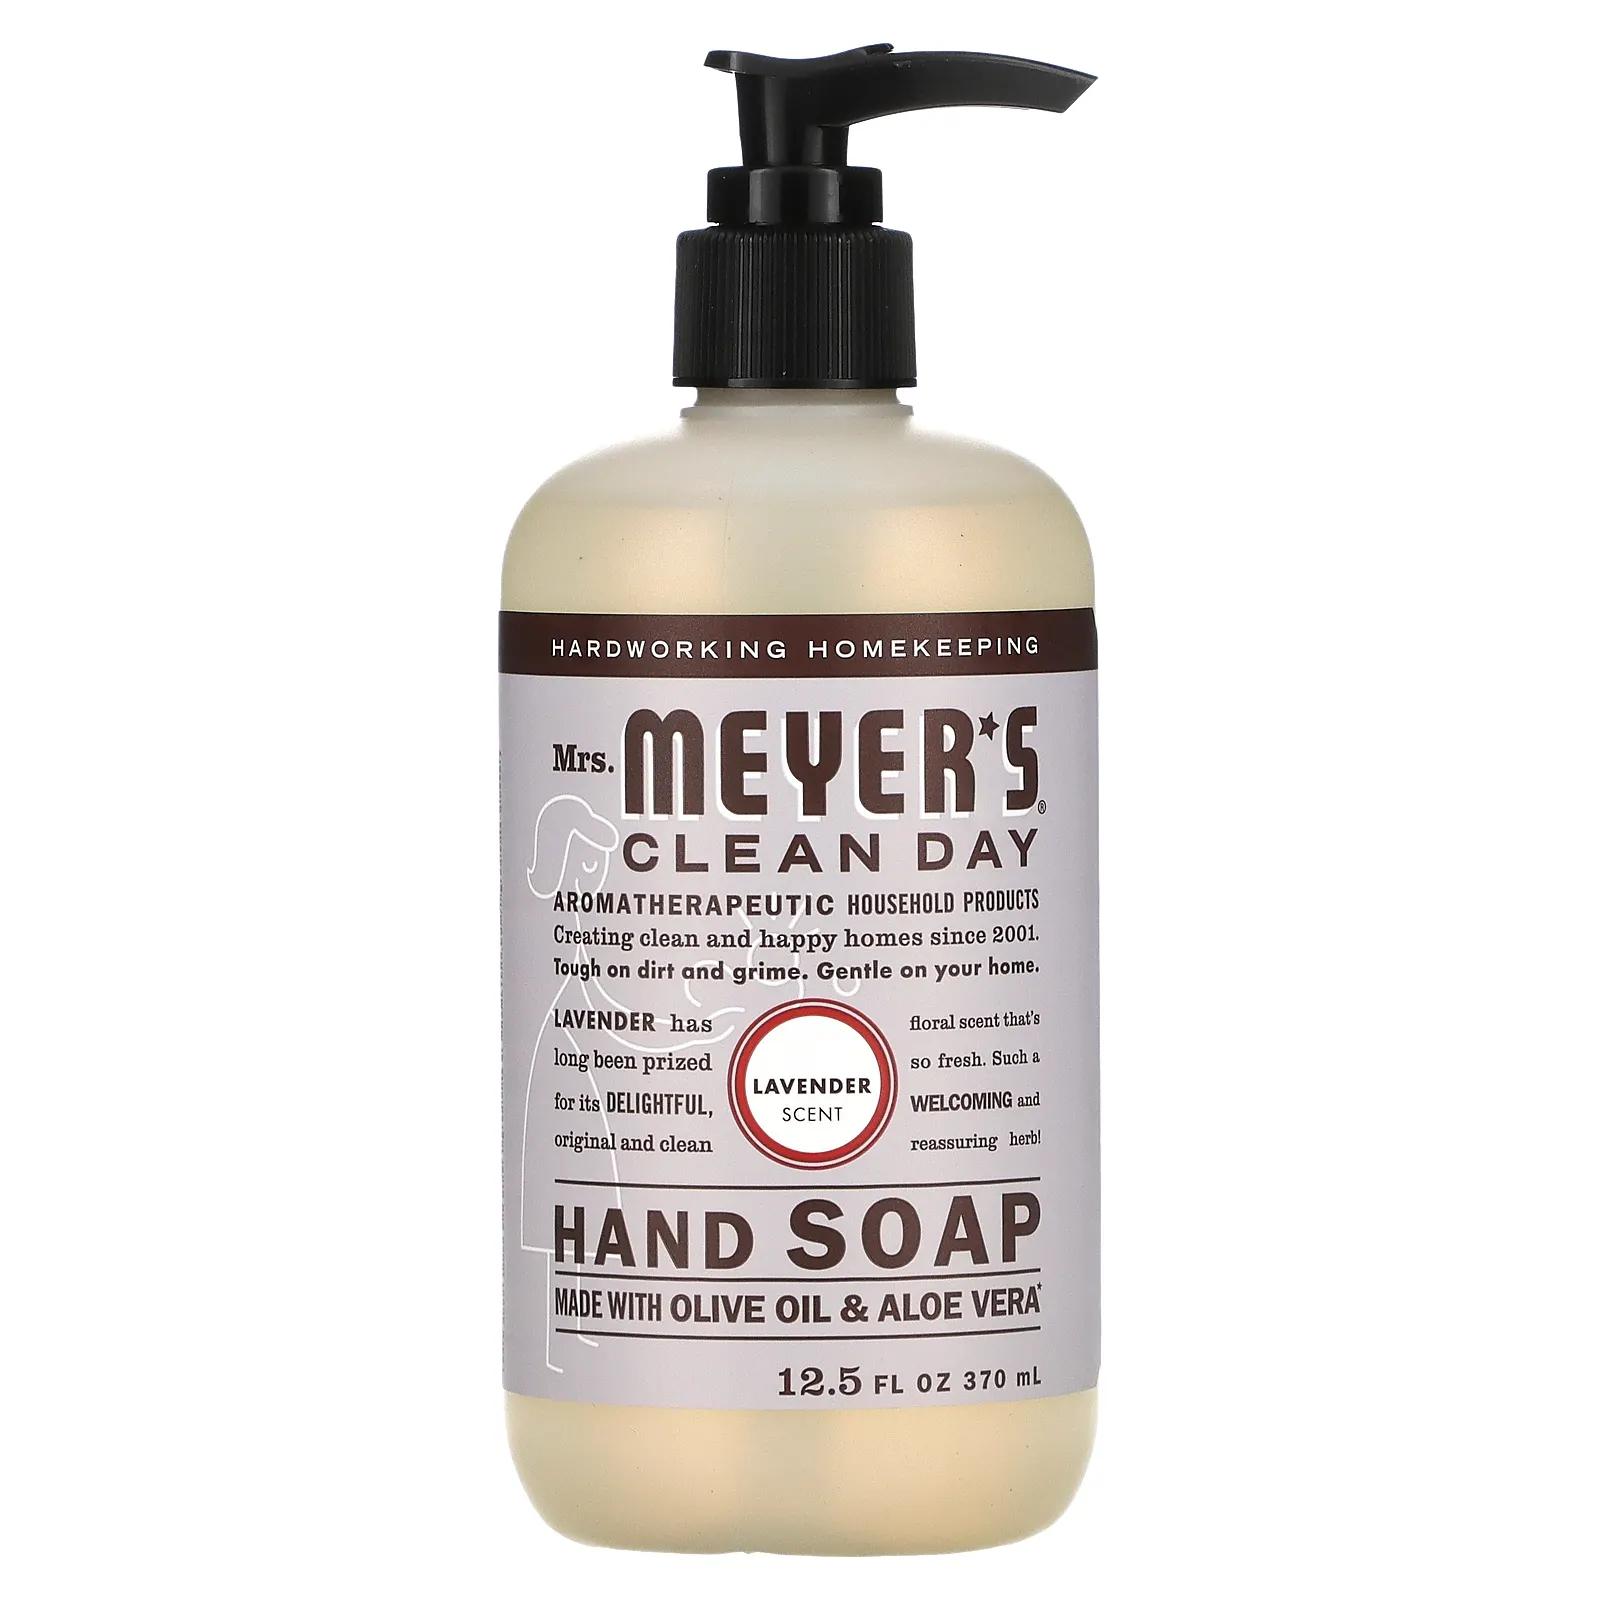 Mrs. Meyers Clean Day Hand Soap Lavender Scent 12.5 fl oz (370 ml)